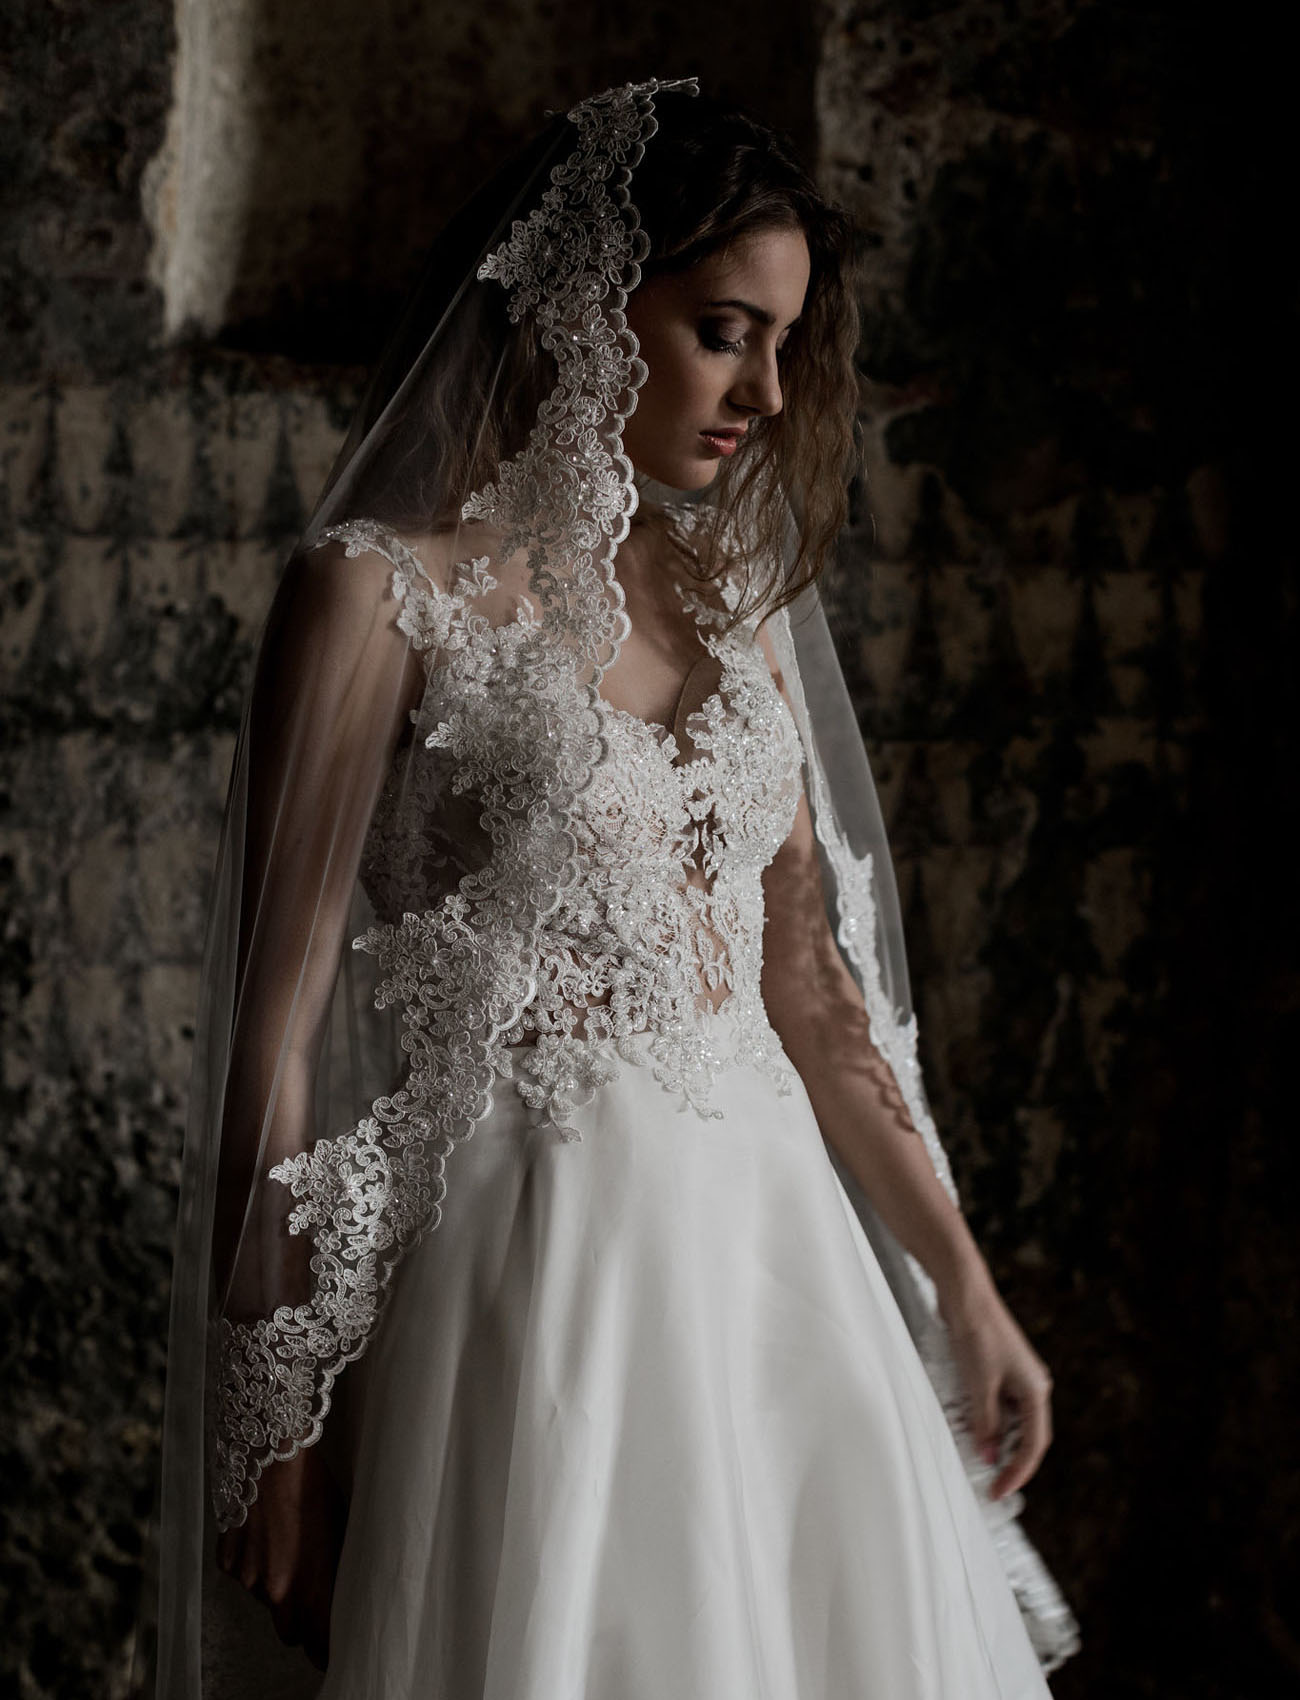 The bride was wearing a gorgeous lace bodice V neck wedding dress with a silk skirt and a mantilla veil with lace